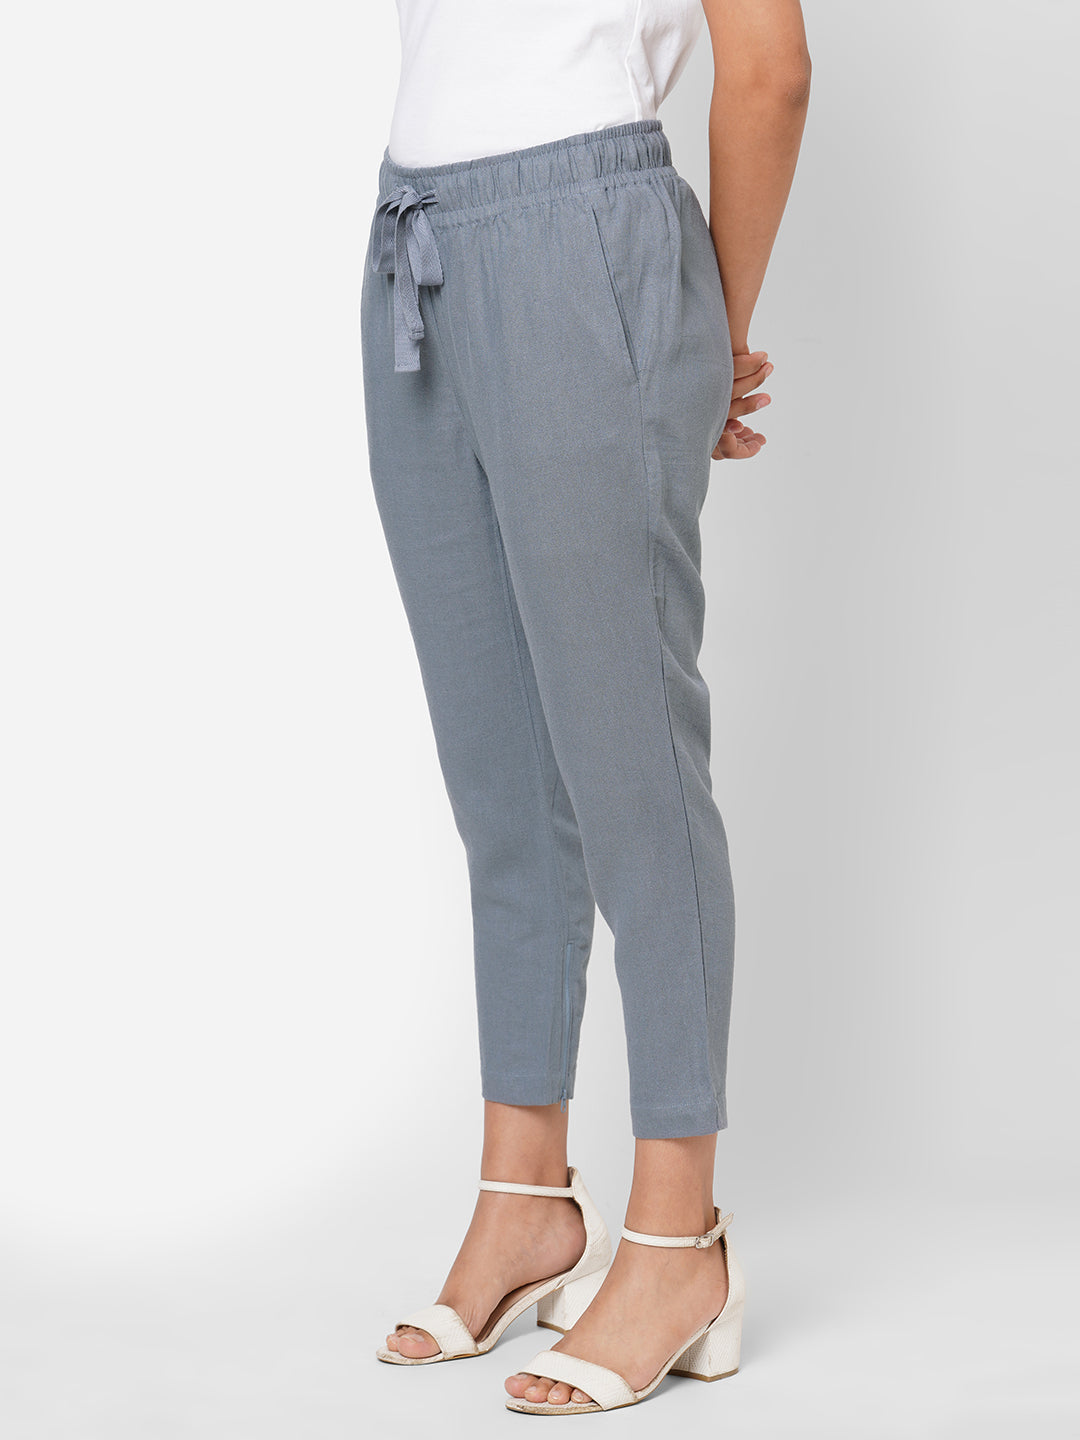 Buy Grey Trousers & Pants for Women by FITHUB Online | Ajio.com